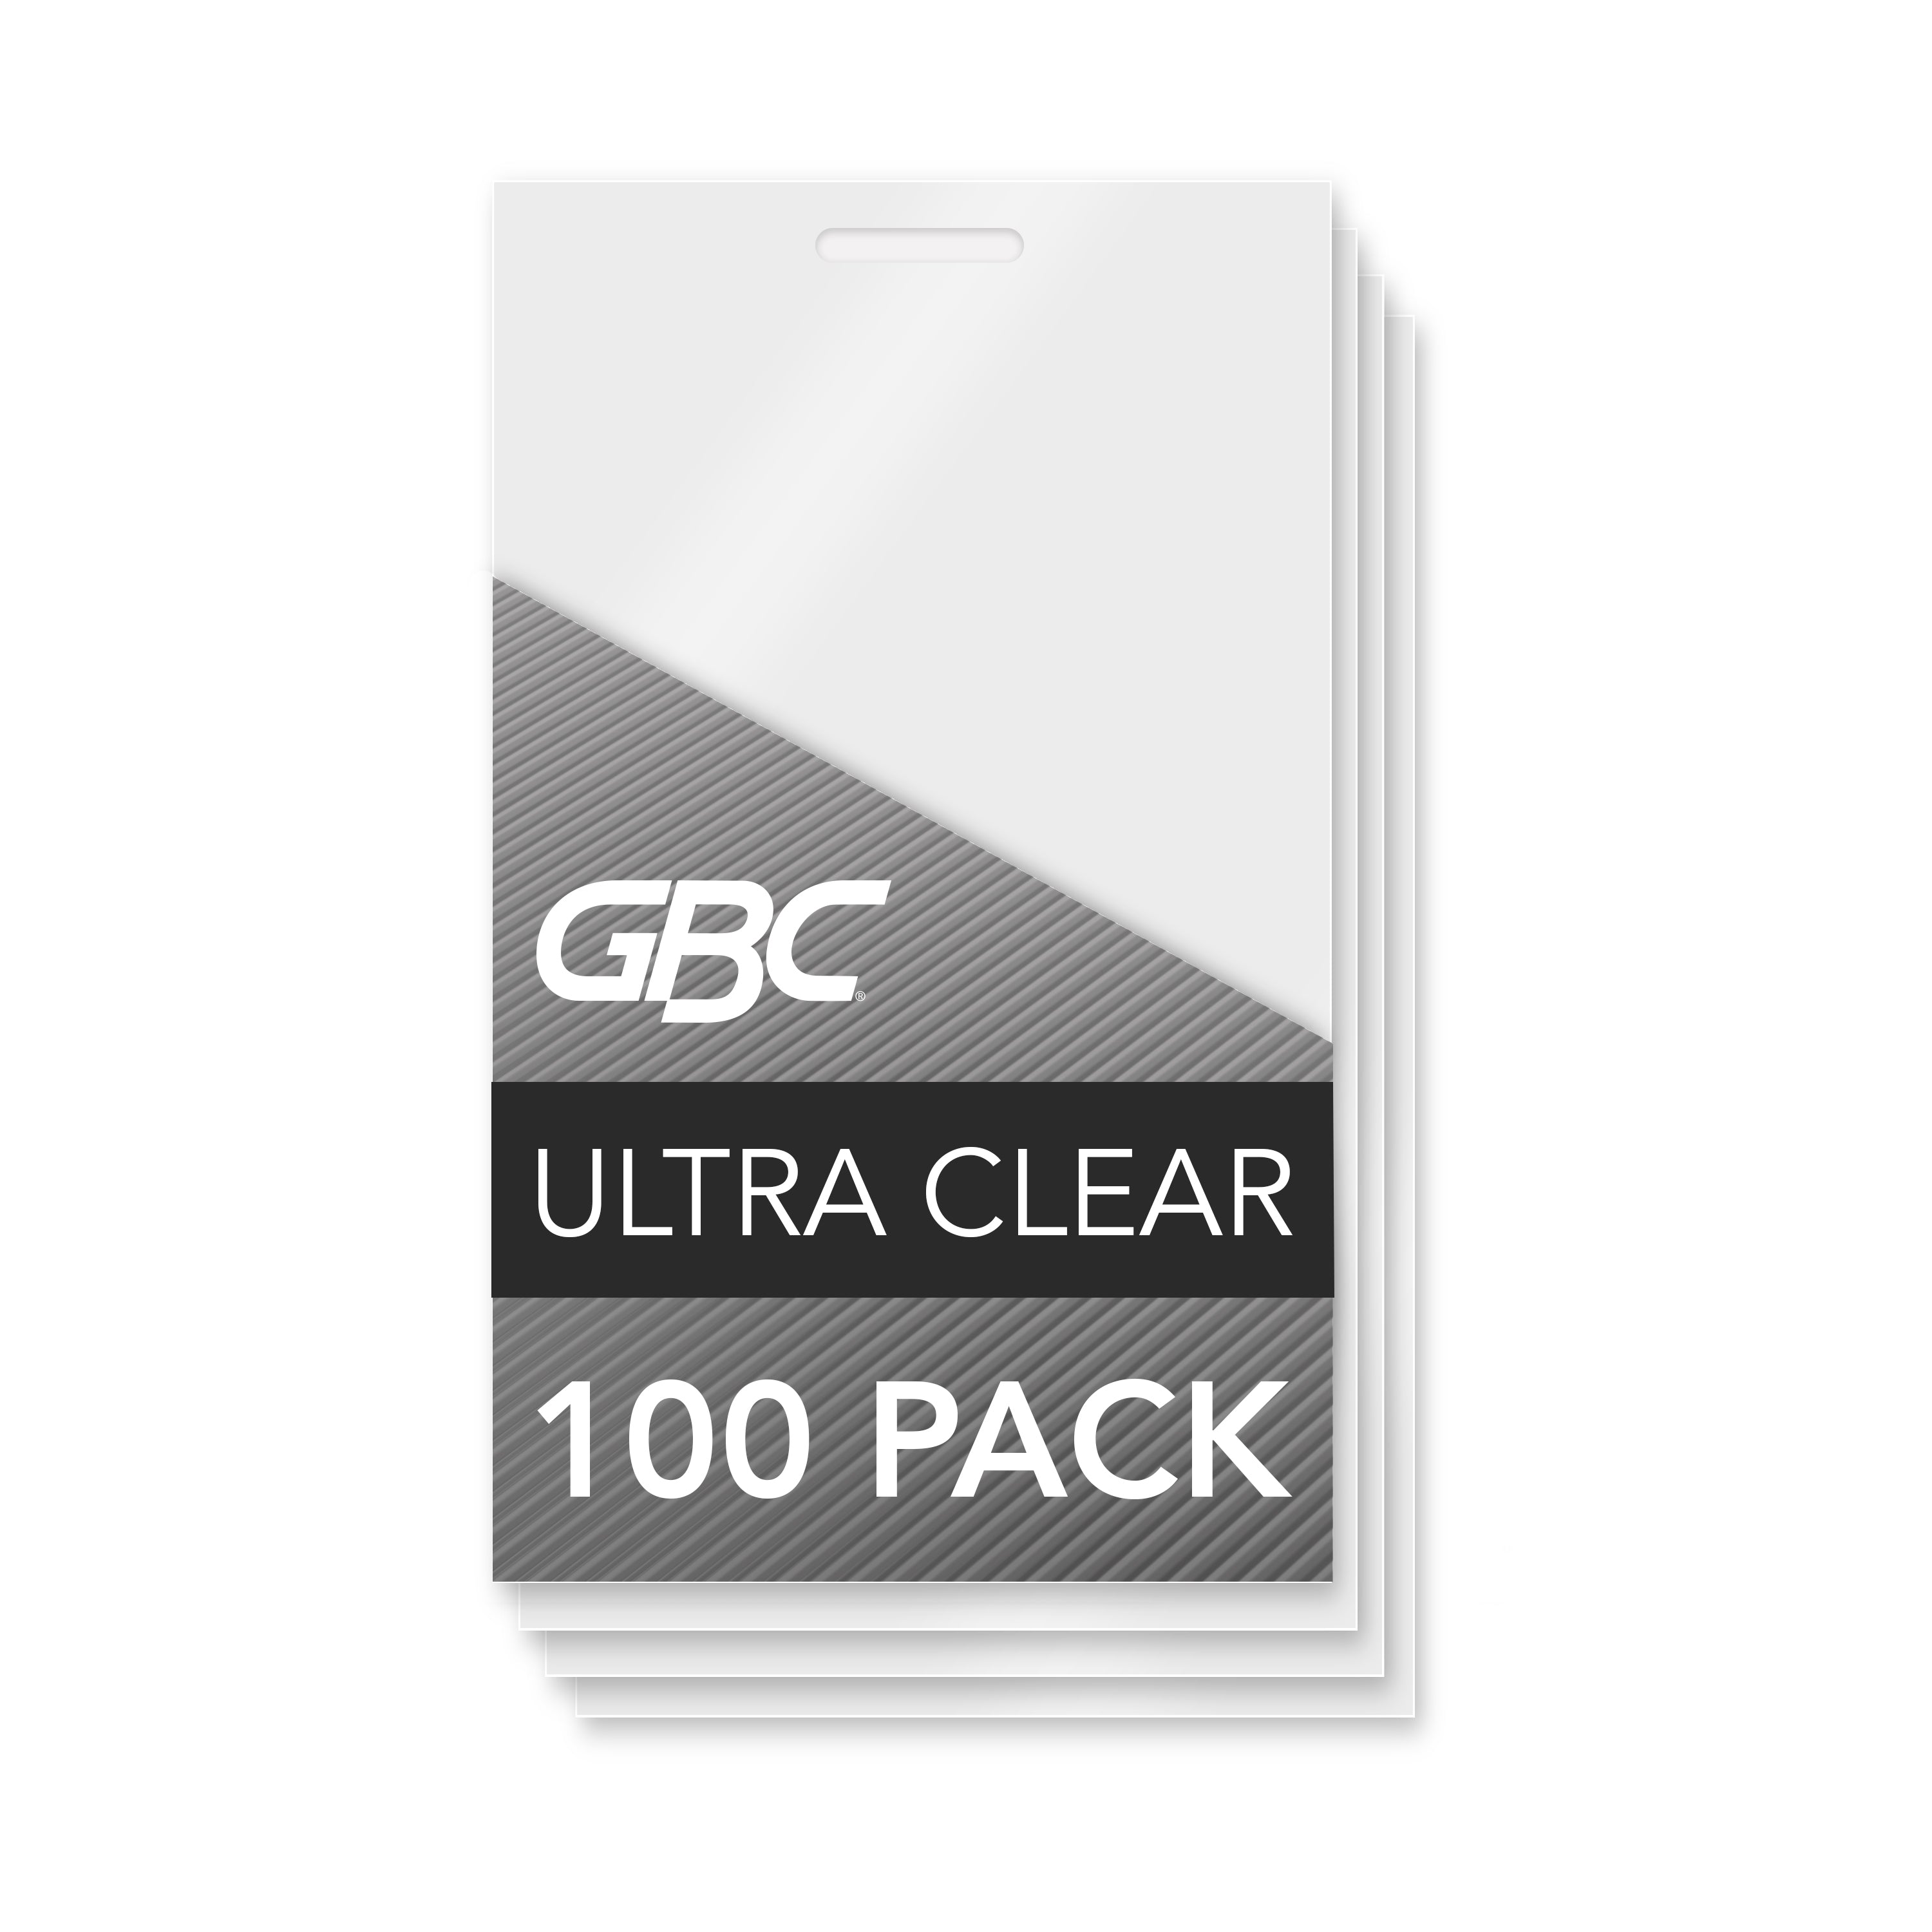 GBC HeatSeal Ultra Clear Laminating Pouches - Luggage Tag Size